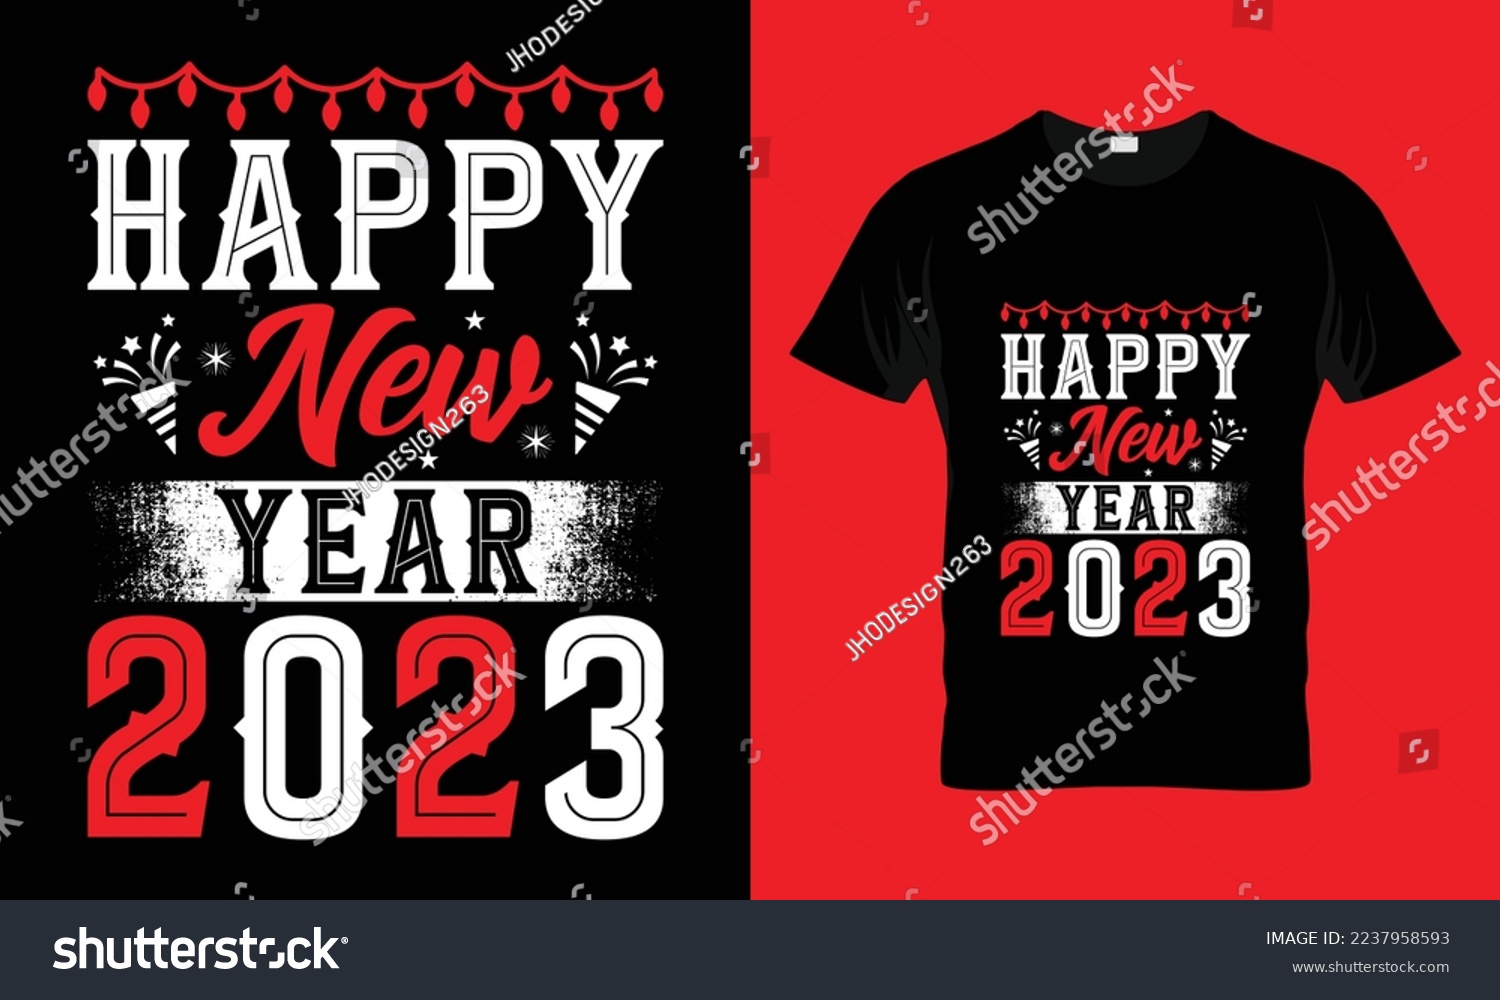 SVG of Happy new year 2023 design template vector and typography.
Ready for t-shirt, mug,gift and other printing,2023 svg design,New Year Stickers quotes t shirt designs
Happy new year svg. svg